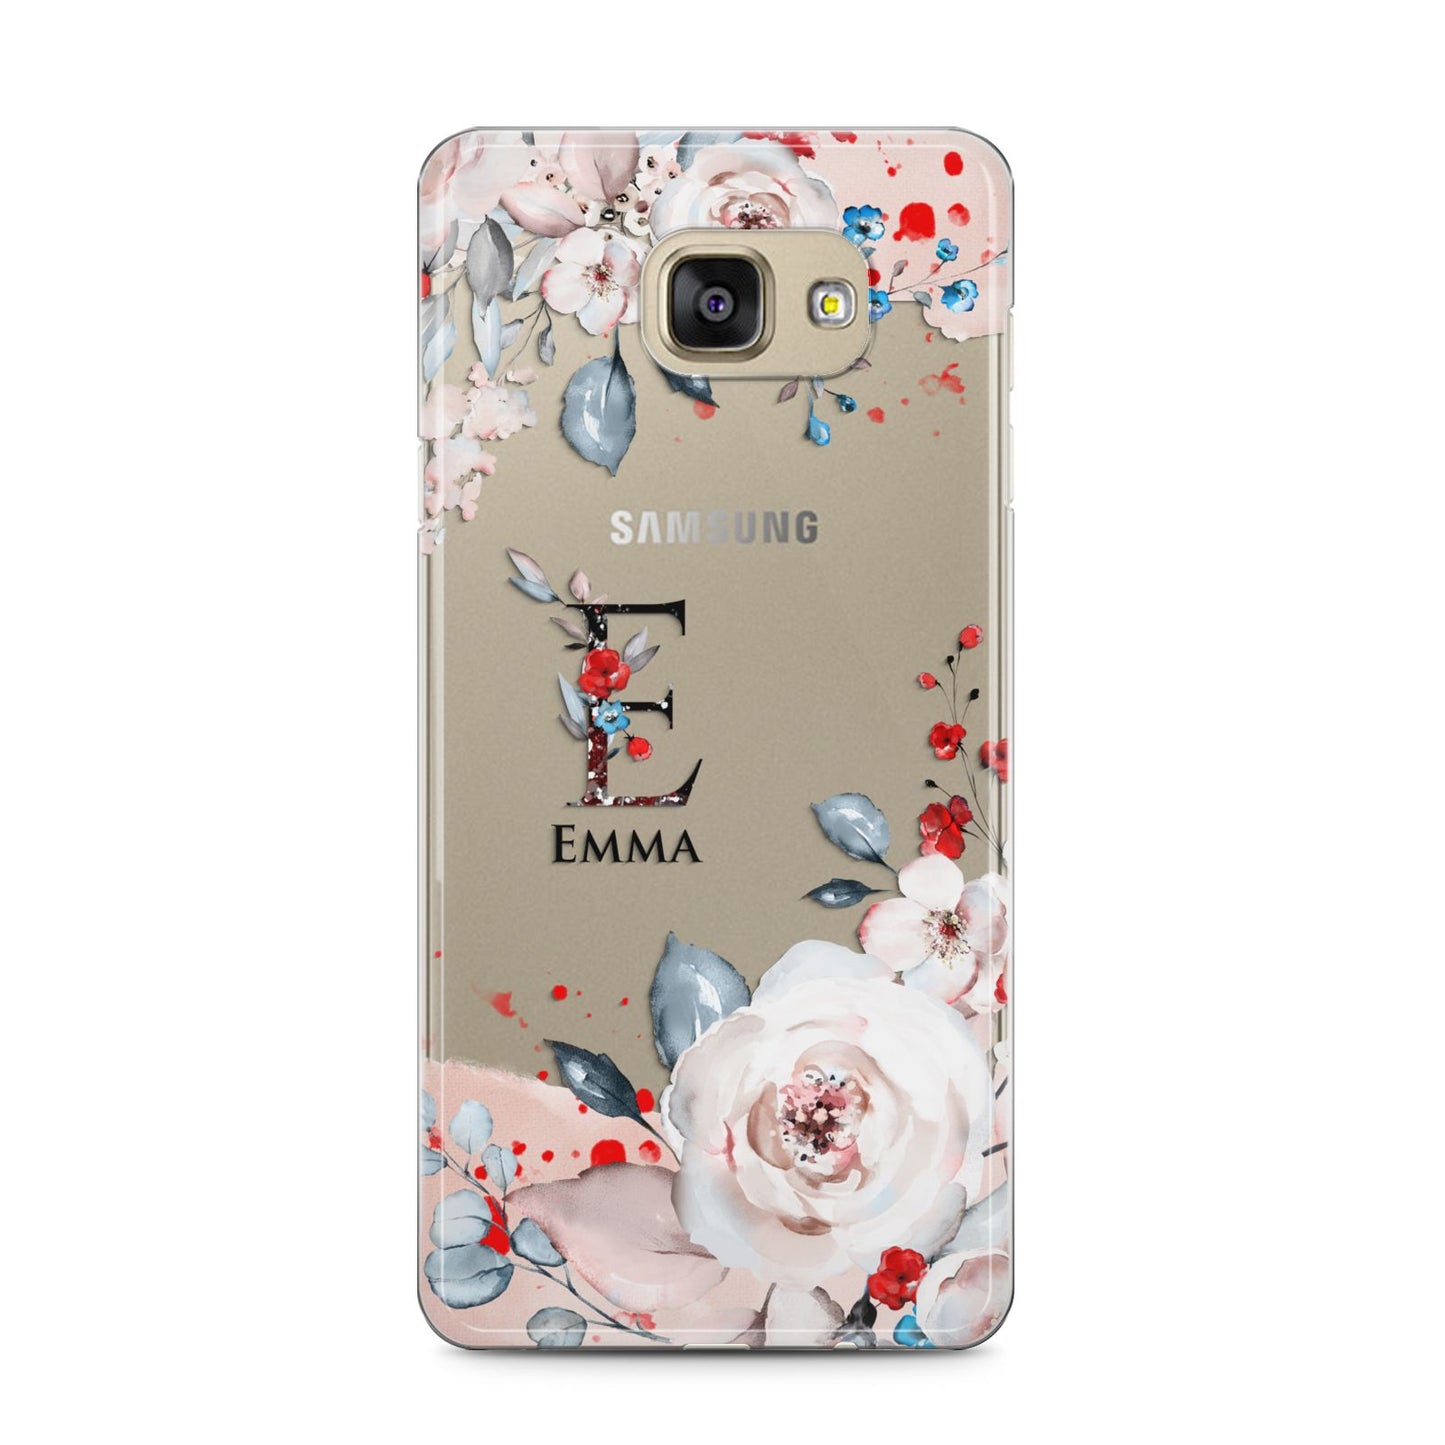 Monogrammed Roses Floral Wreath Samsung Galaxy A5 2016 Case on gold phone